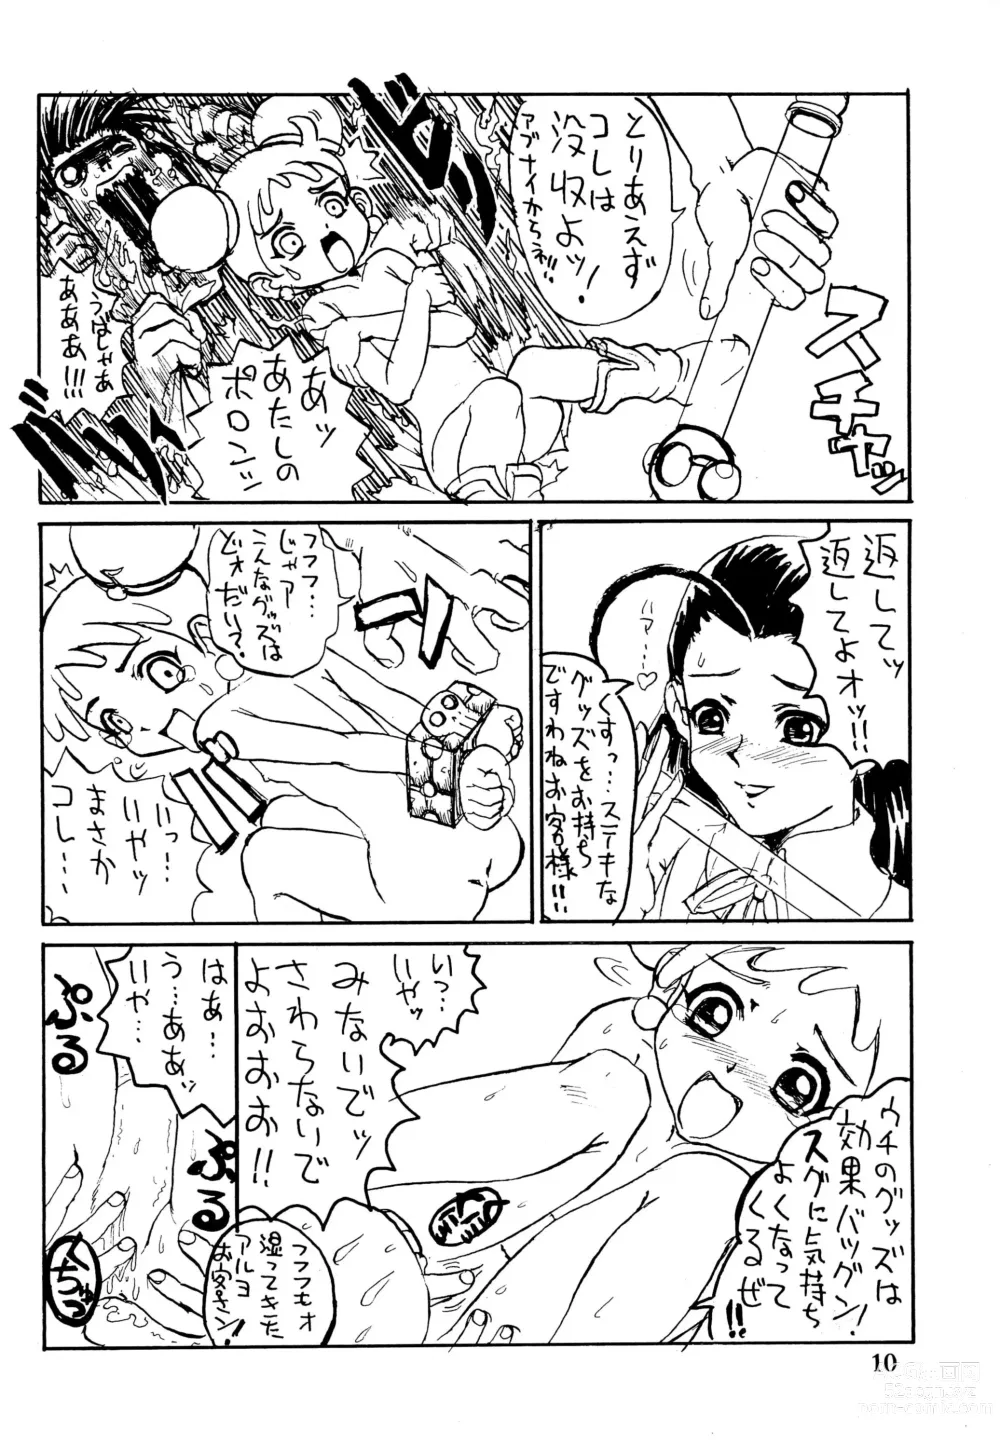 Page 10 of doujinshi Happy Lucky Magicalday